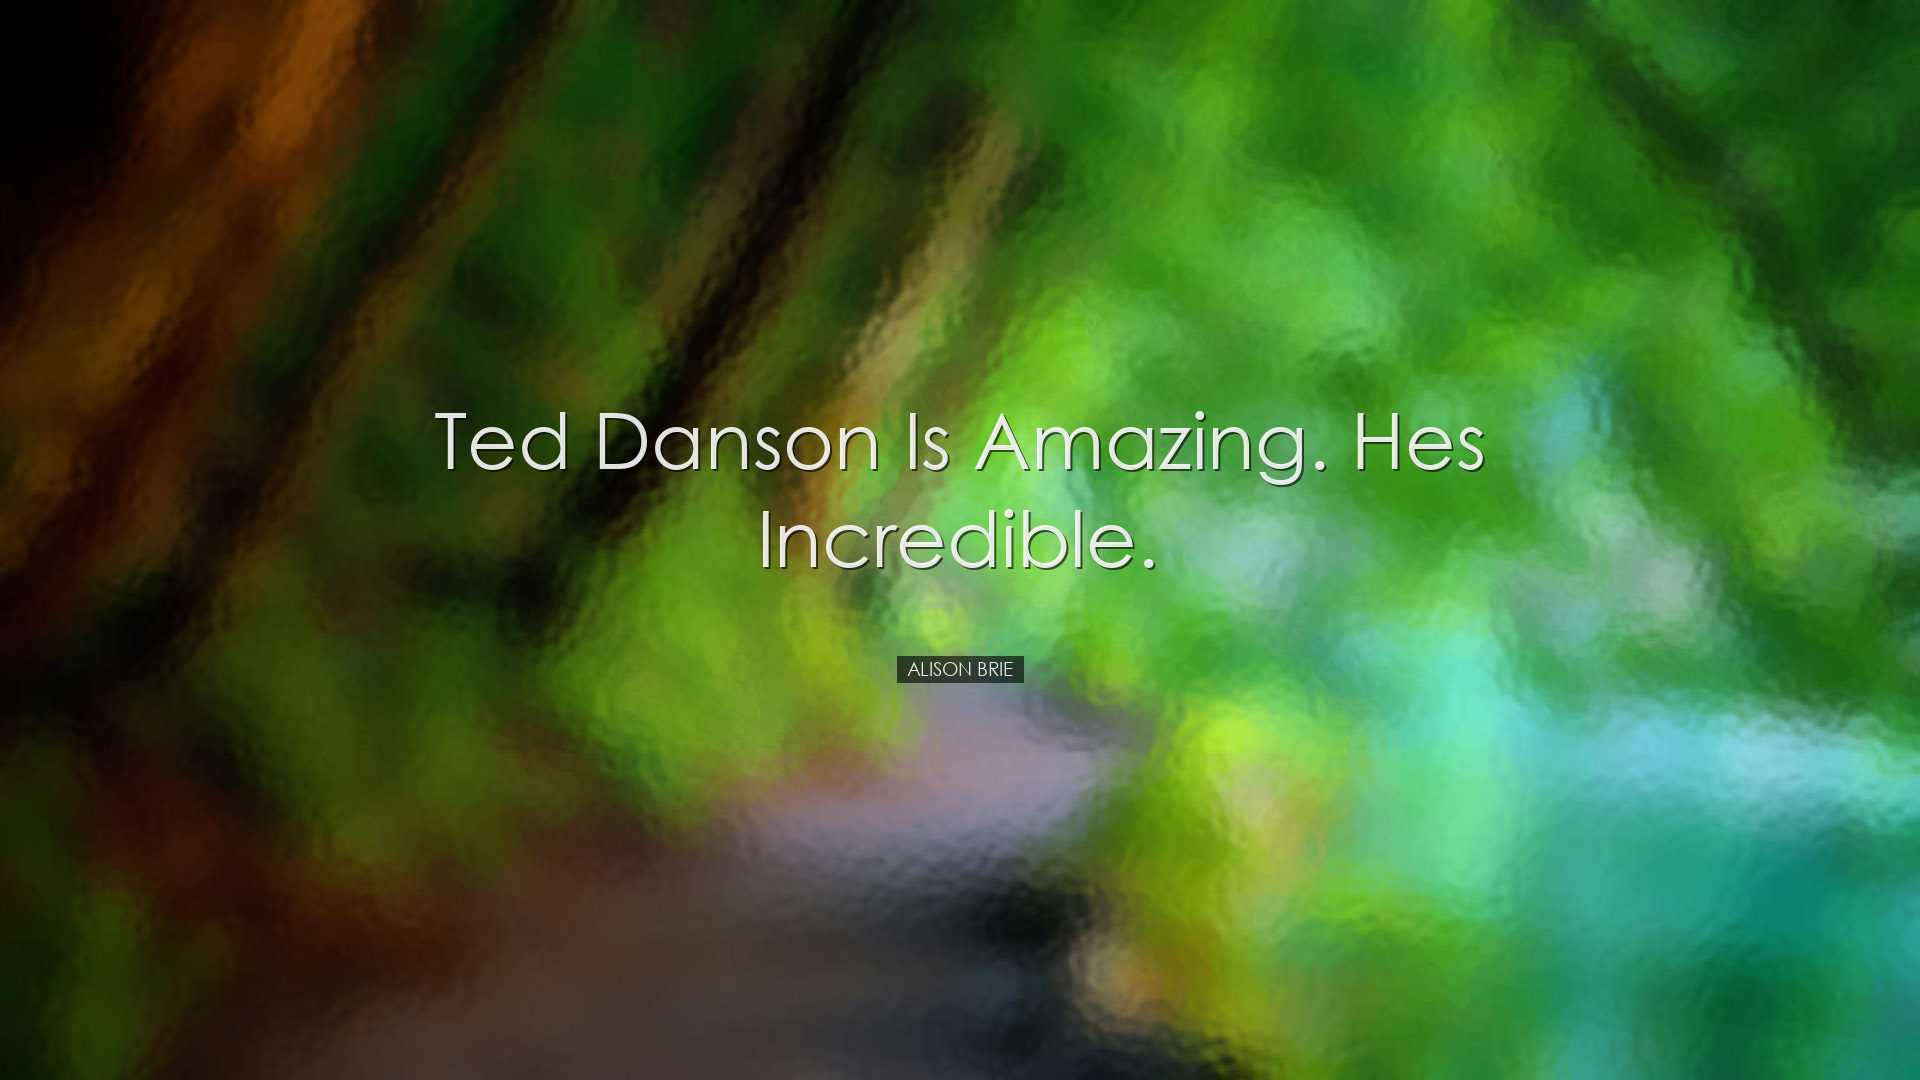 Ted Danson is amazing. Hes incredible. - Alison Brie